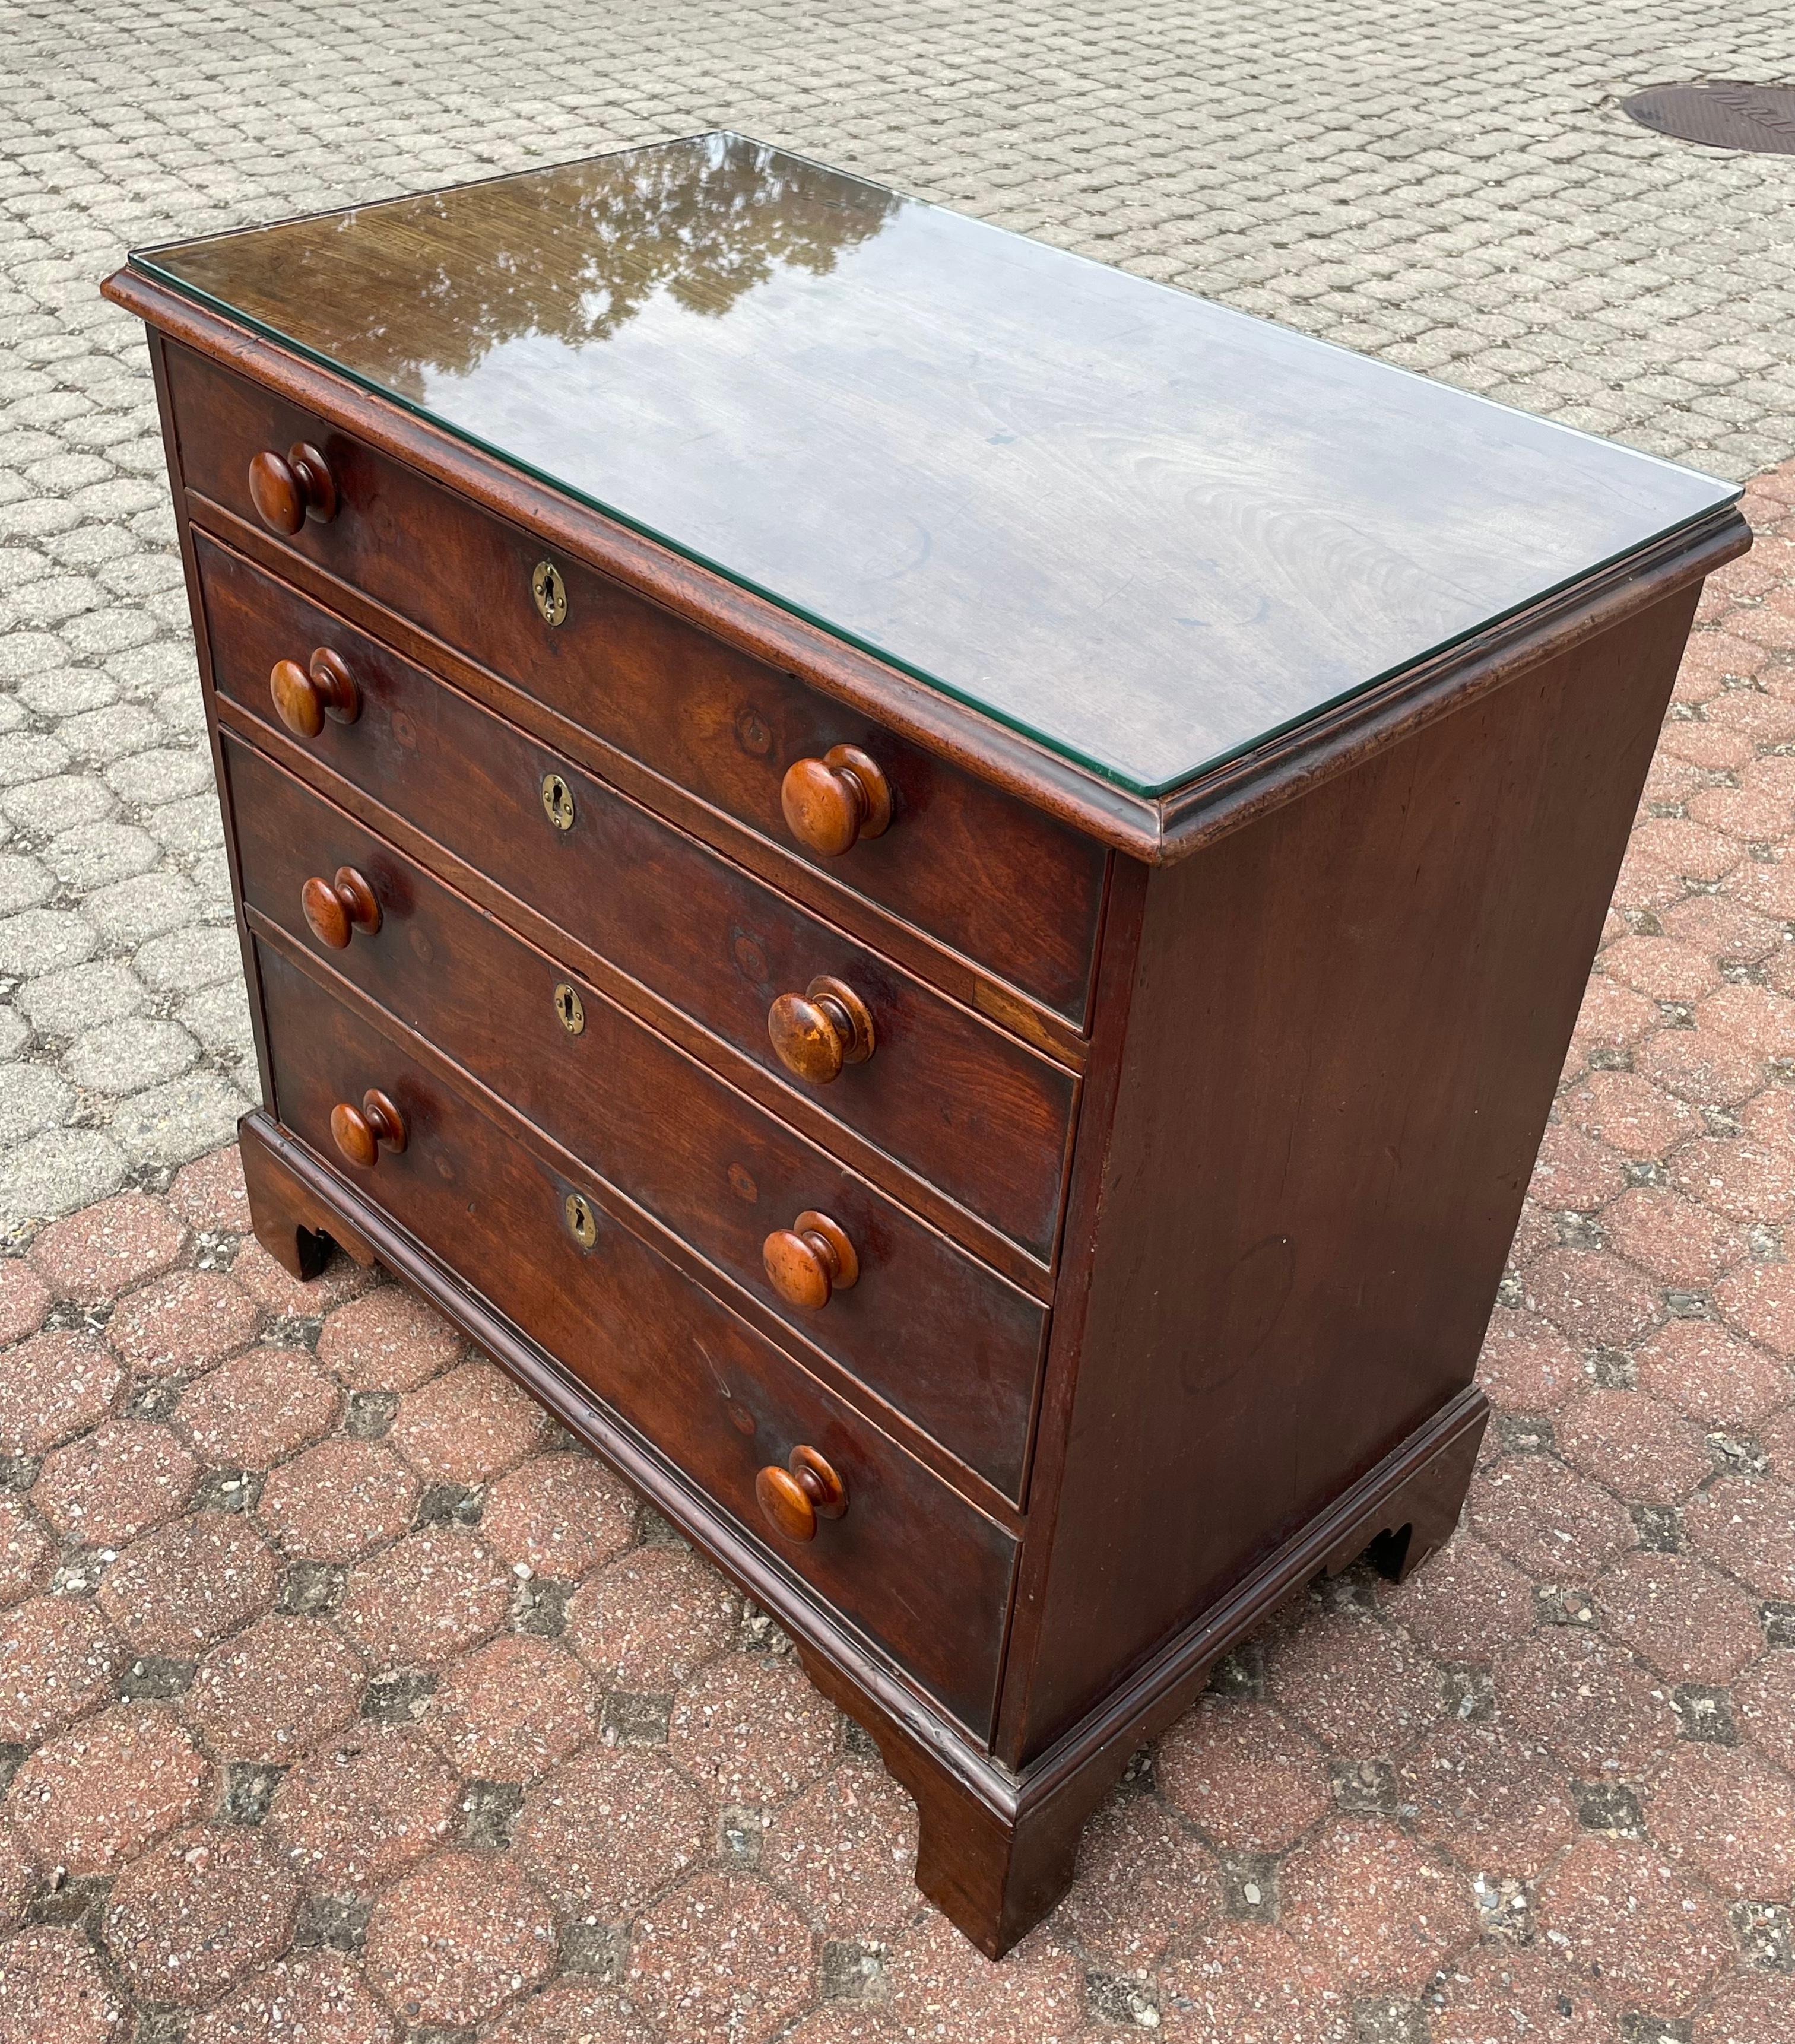 19th c. English Mahogany chest of four graduated drawers with lovely mellow patina.  Top slightly faded with sun with two old patched repairs.  Upper drawer with dividers creating three sections.  Each drawer with a central brass key escutcheon (no